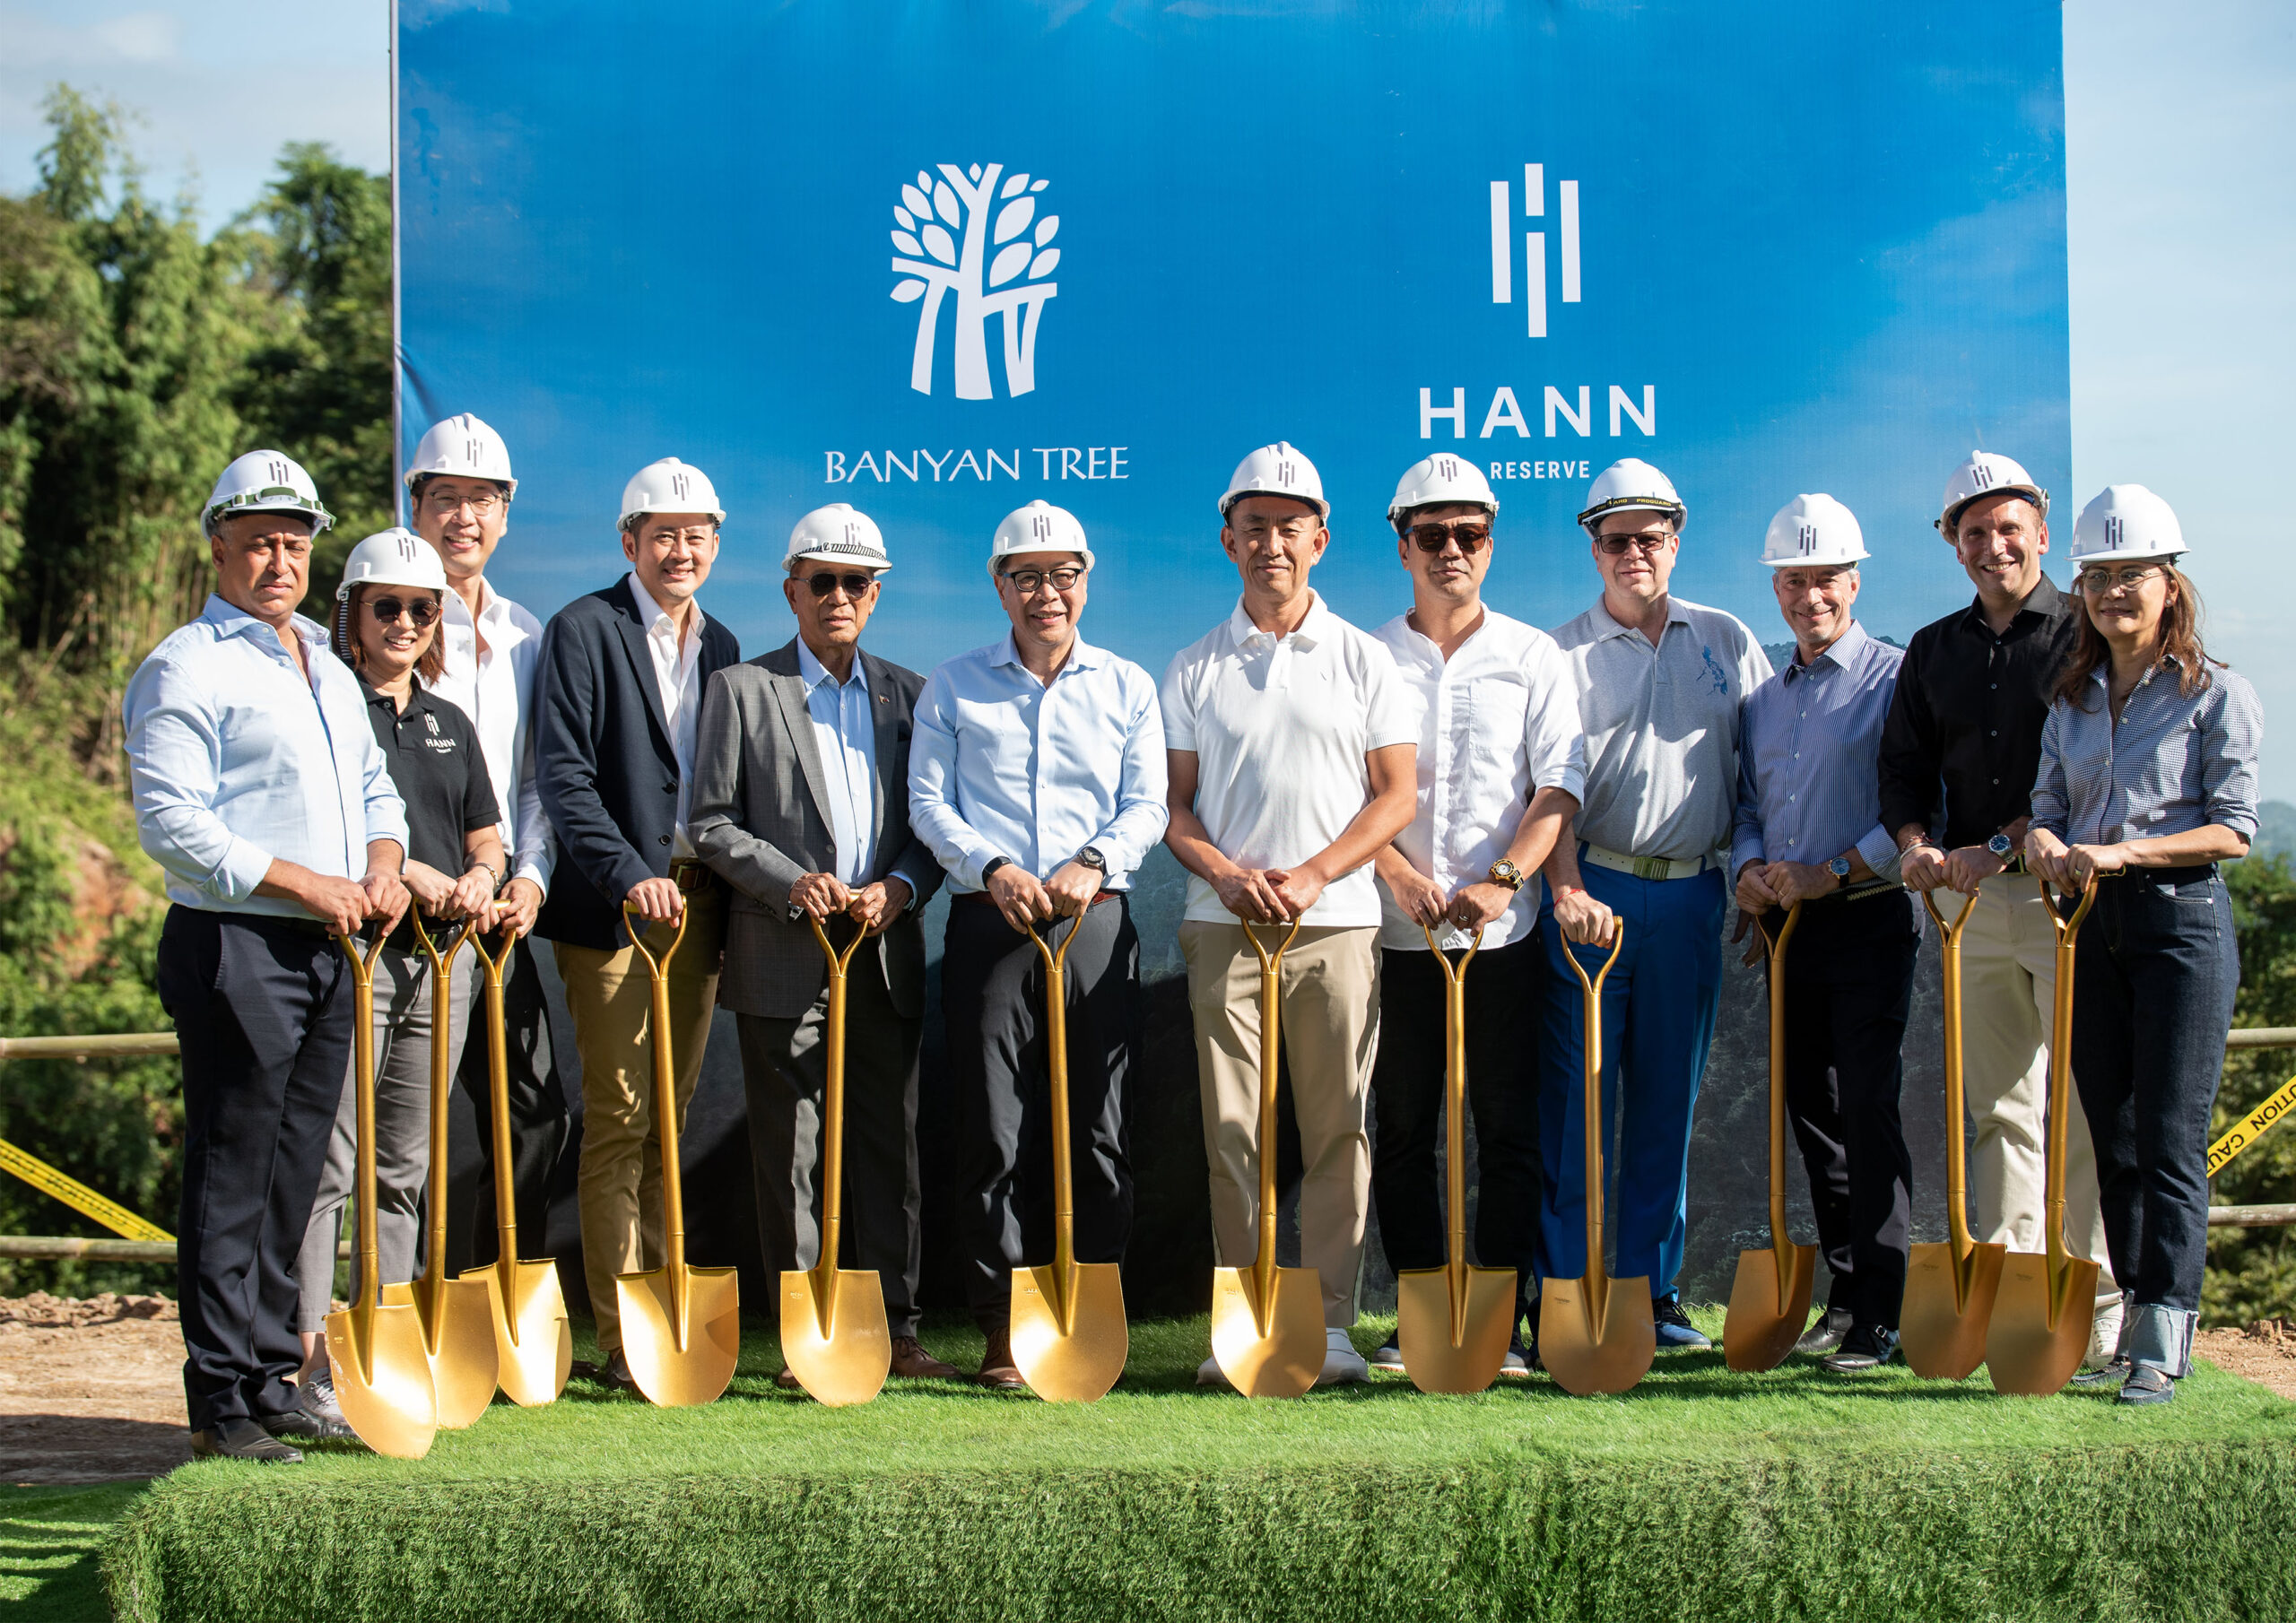 Banyan Tree arrives in the Philippines in the integrated luxury golf development, Hann Reserve 